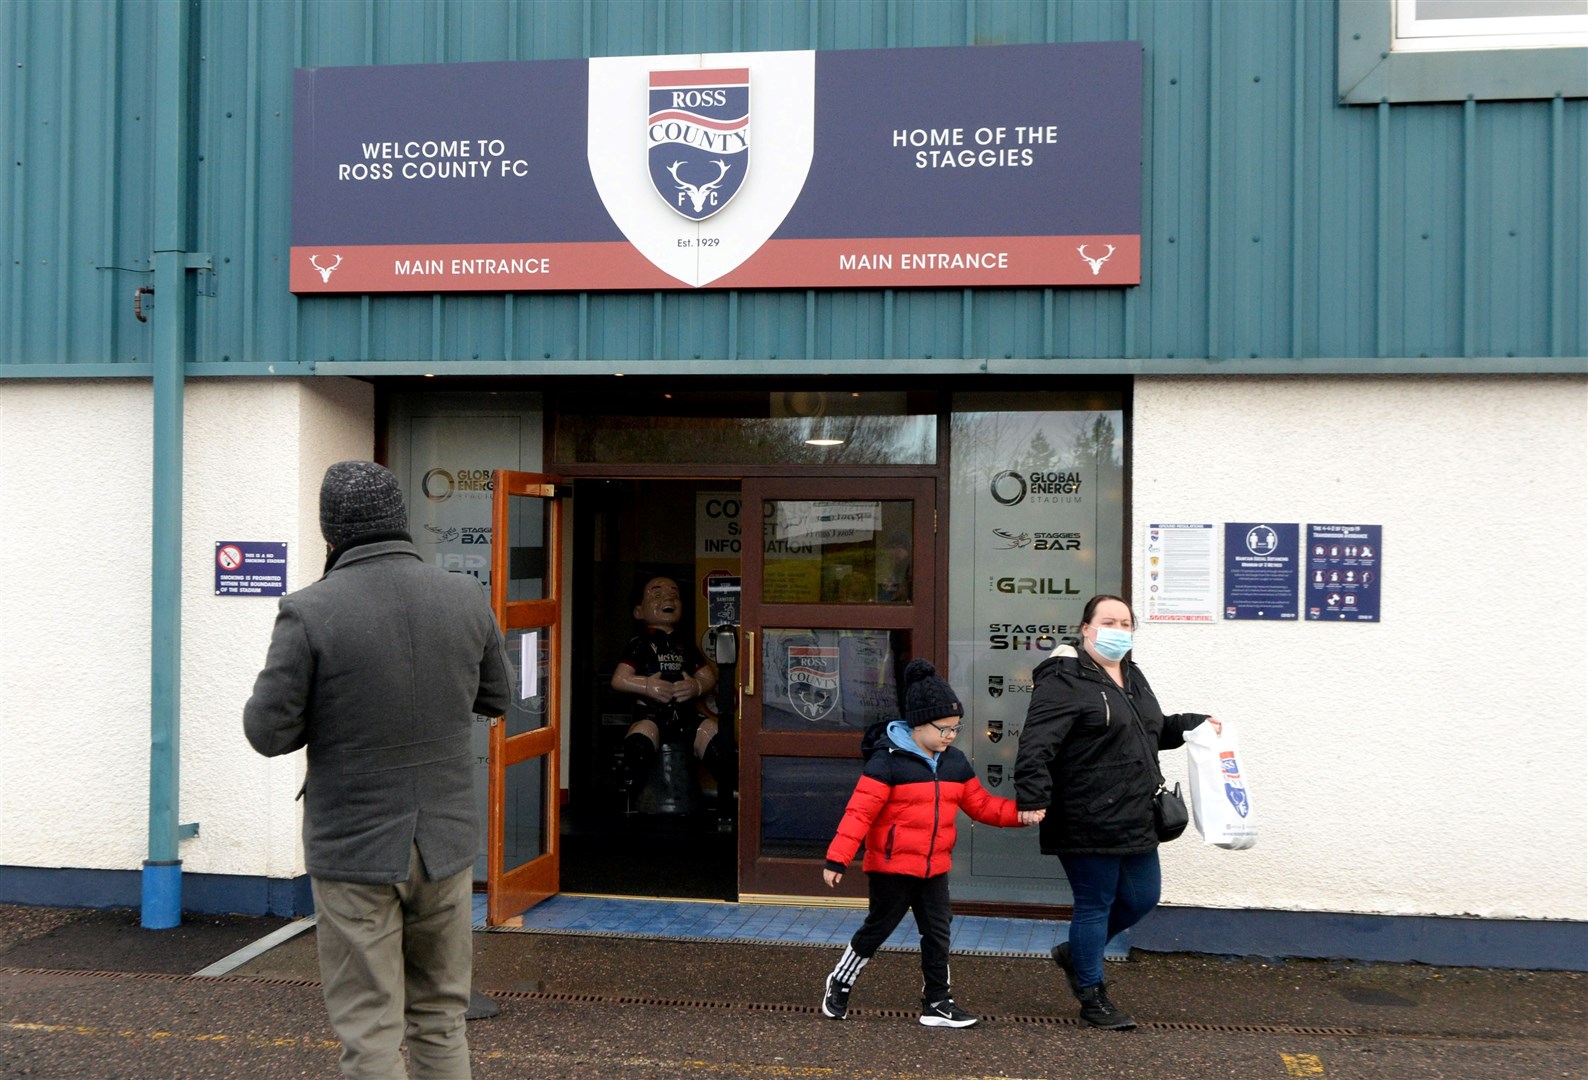 Ross County will entertain Patrick Thistle this Sunday in the second of a two-legged play-off fixture. The winner secures top flight status in the Premiership next season.